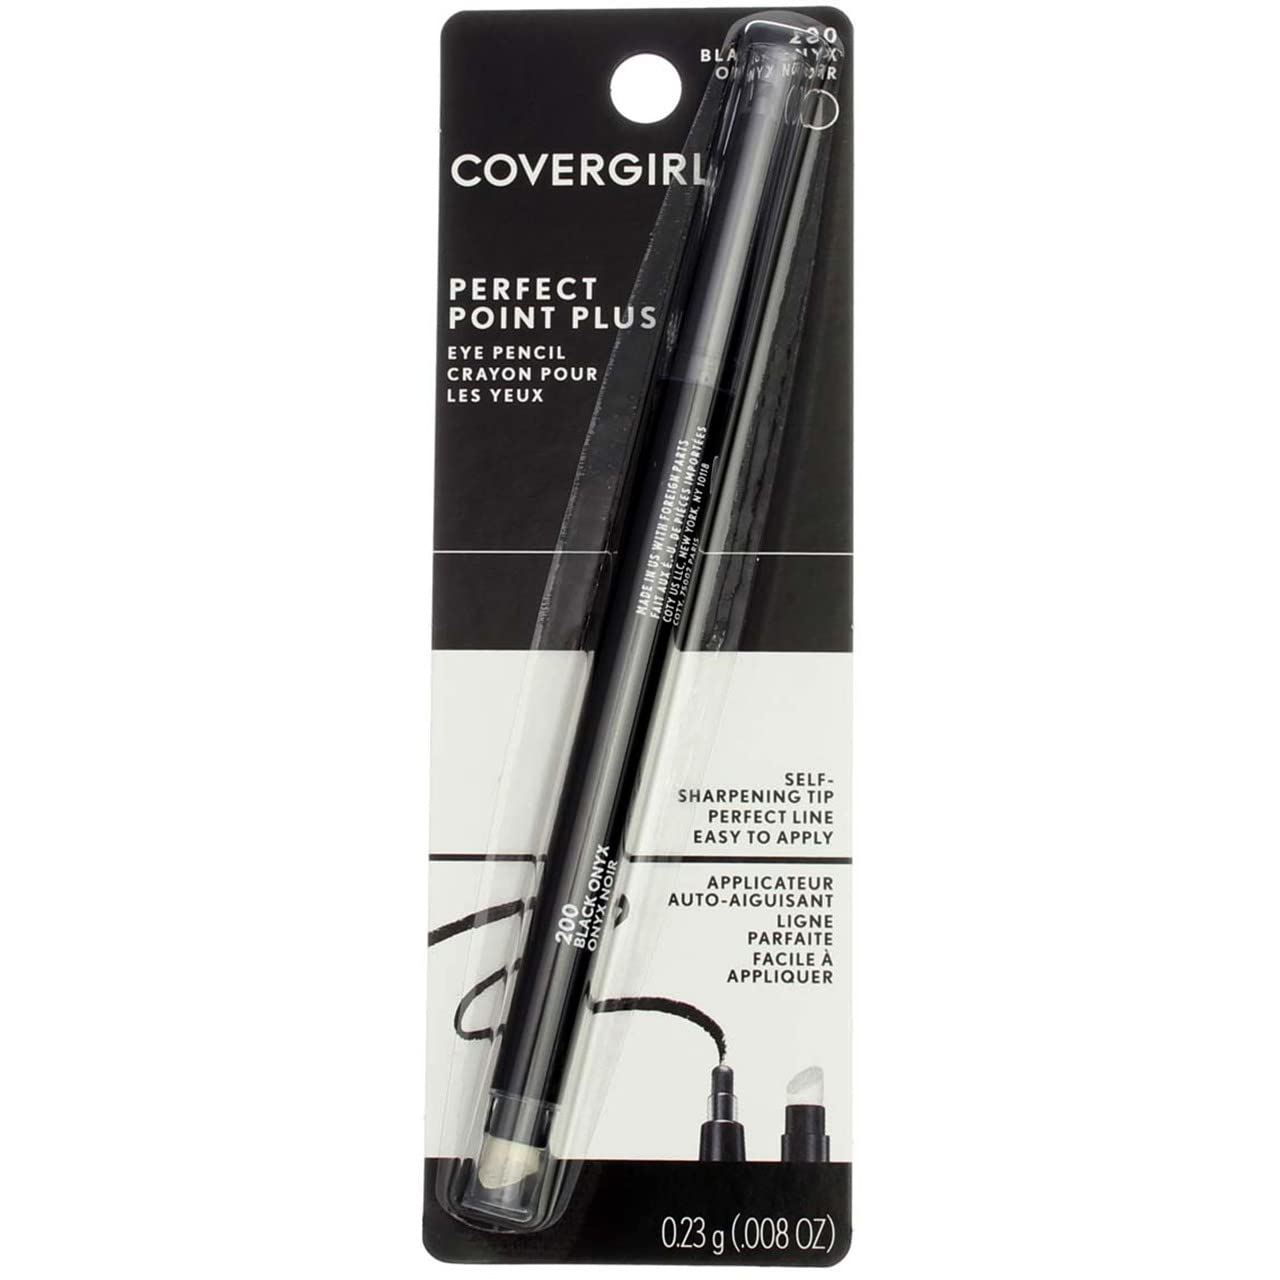 COVERGIRL Perfect Point PLUS Eyeliner, One Pencil, Black Onyx Color, Self Sharpening Eyeliner Pencil, Smudger Tip for Bl